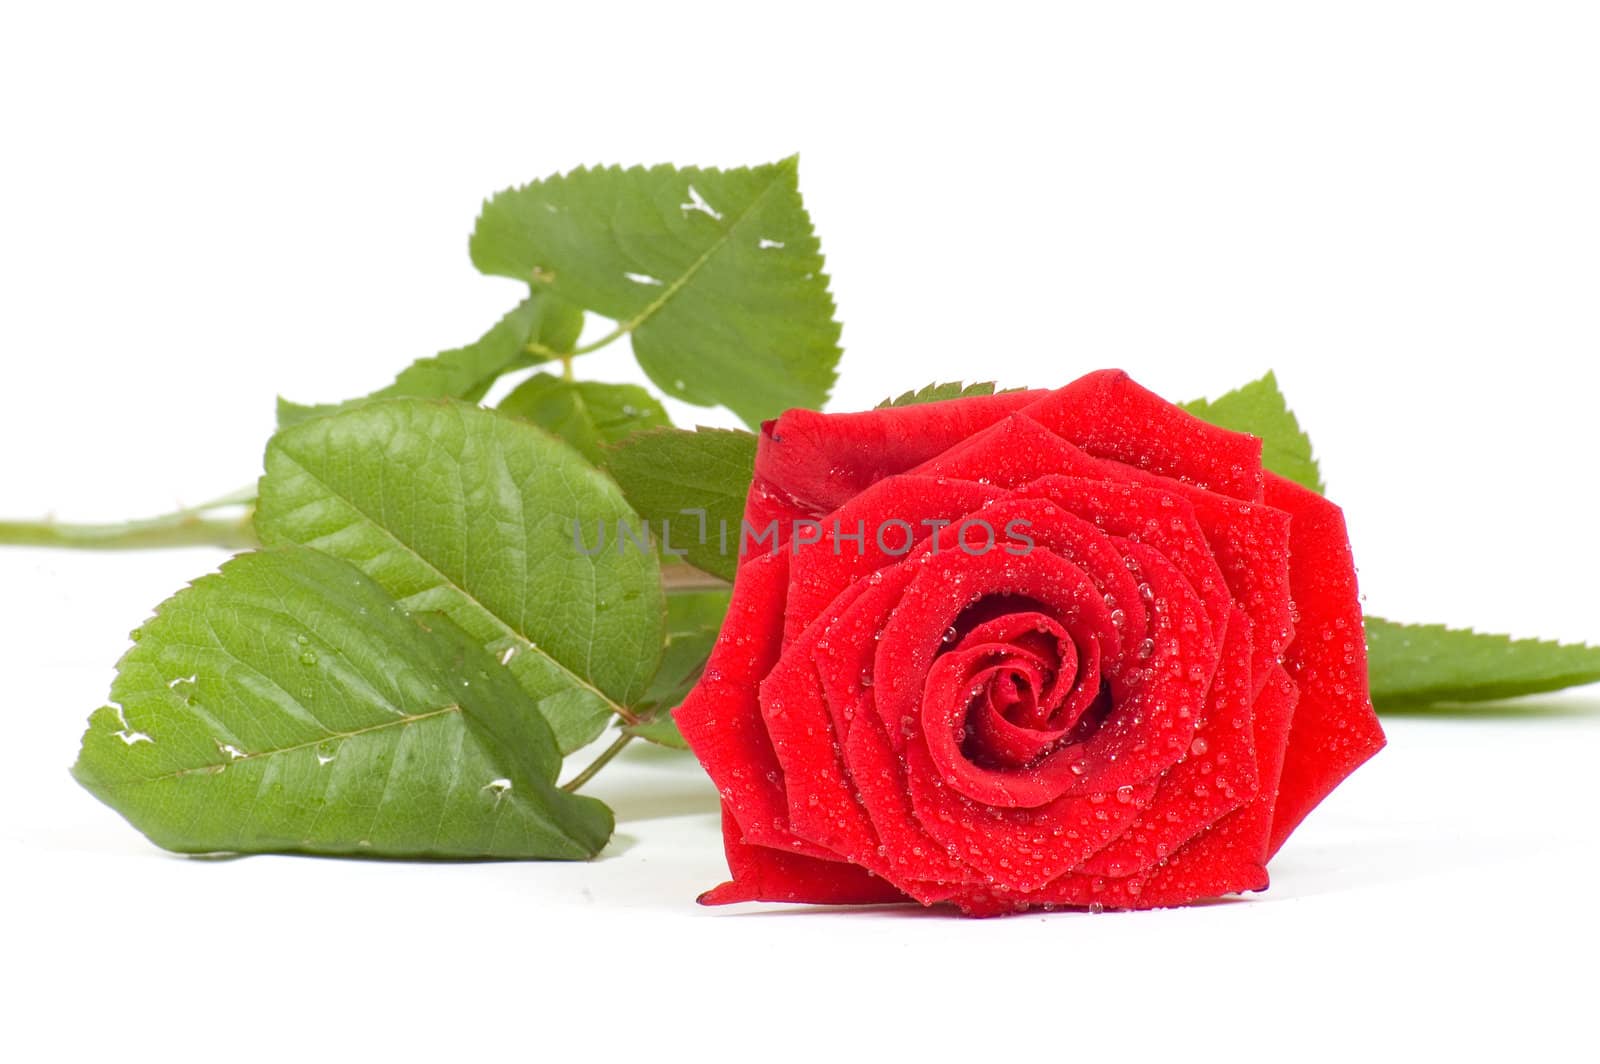 magnificent red rose with drops of water on white background, is by ladyminnie